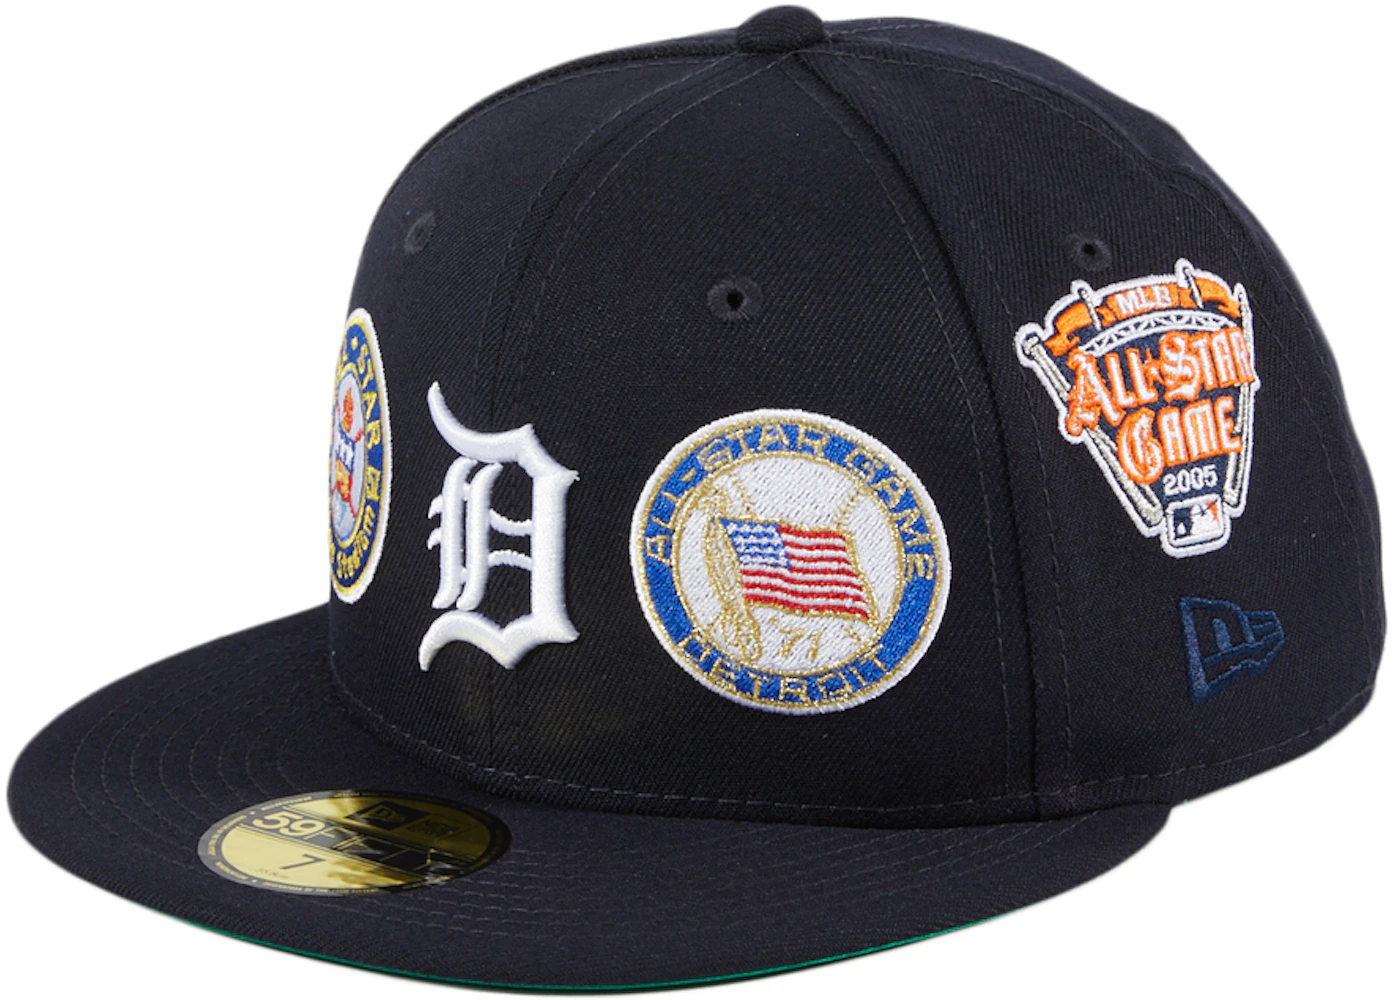 New Era Detroit Tigers All Star Game History Patch Hat Club